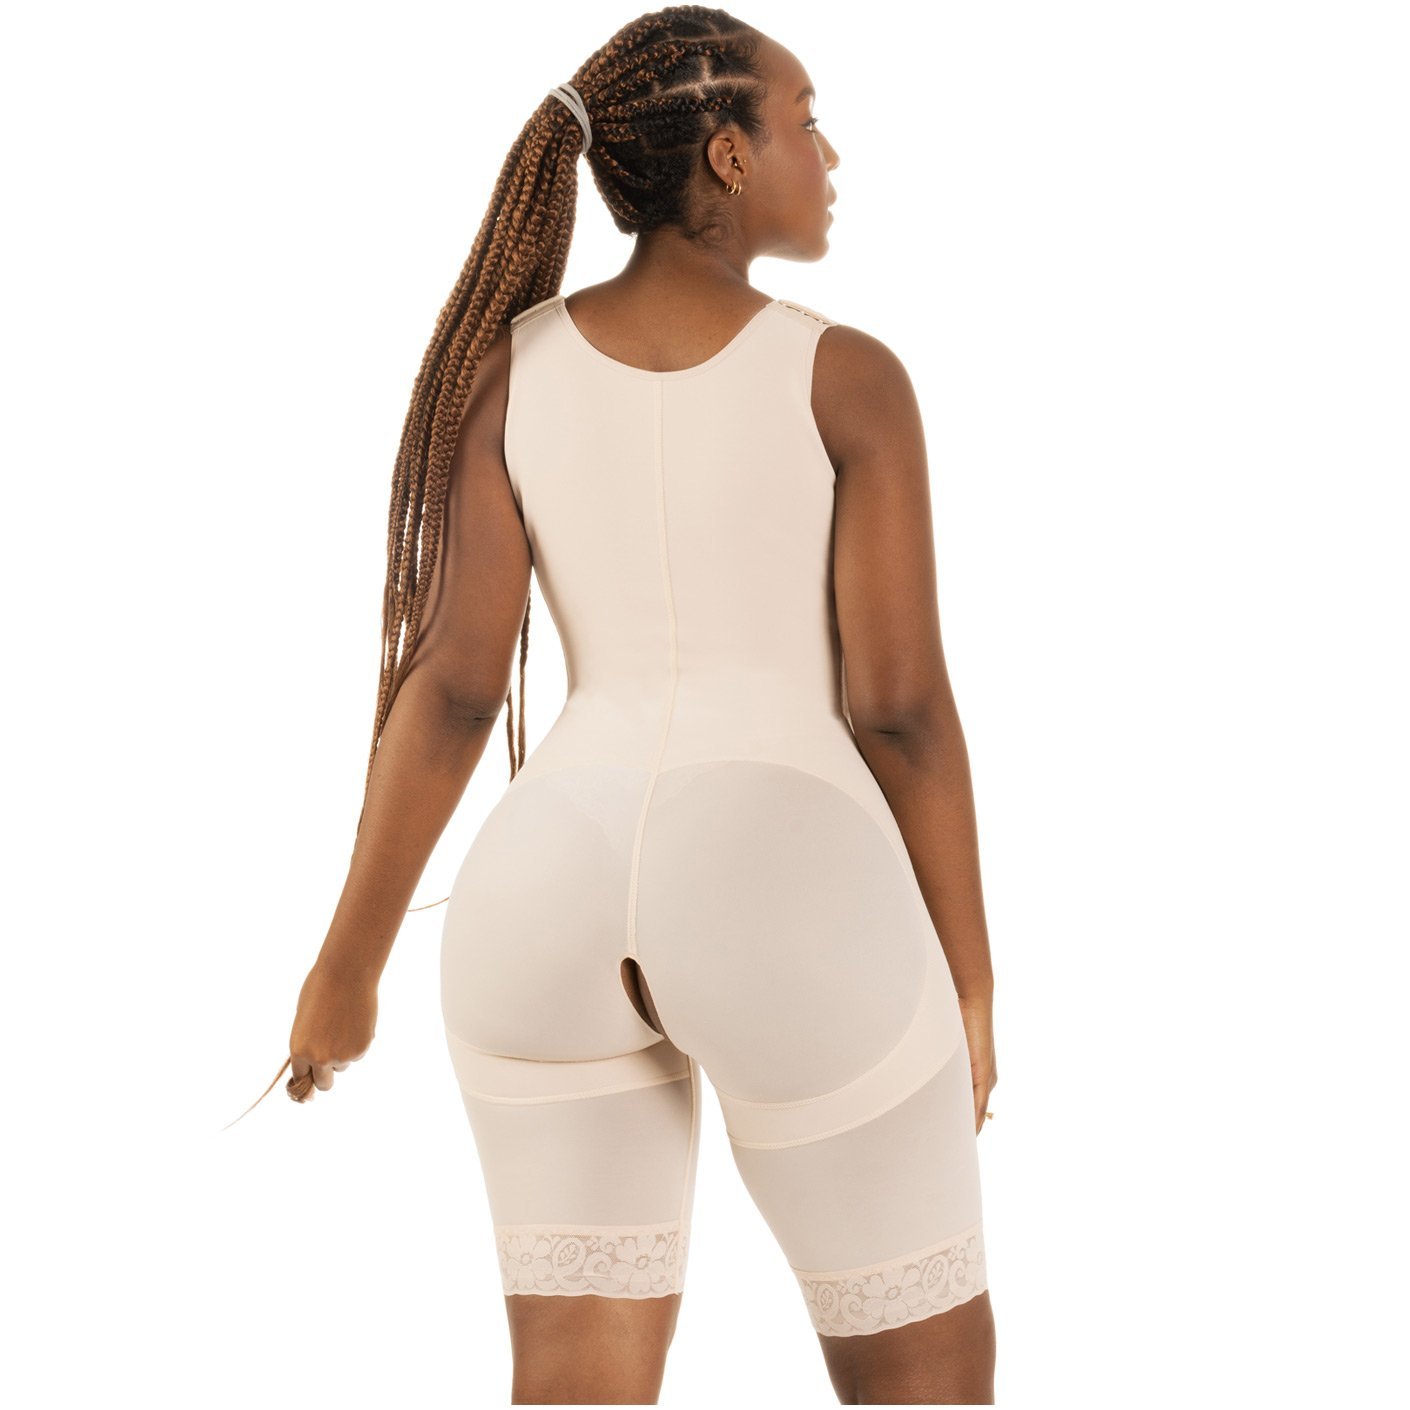 Bling Shapers Extreme 553BF  Shapewear Bodysuit with Built-in Bra